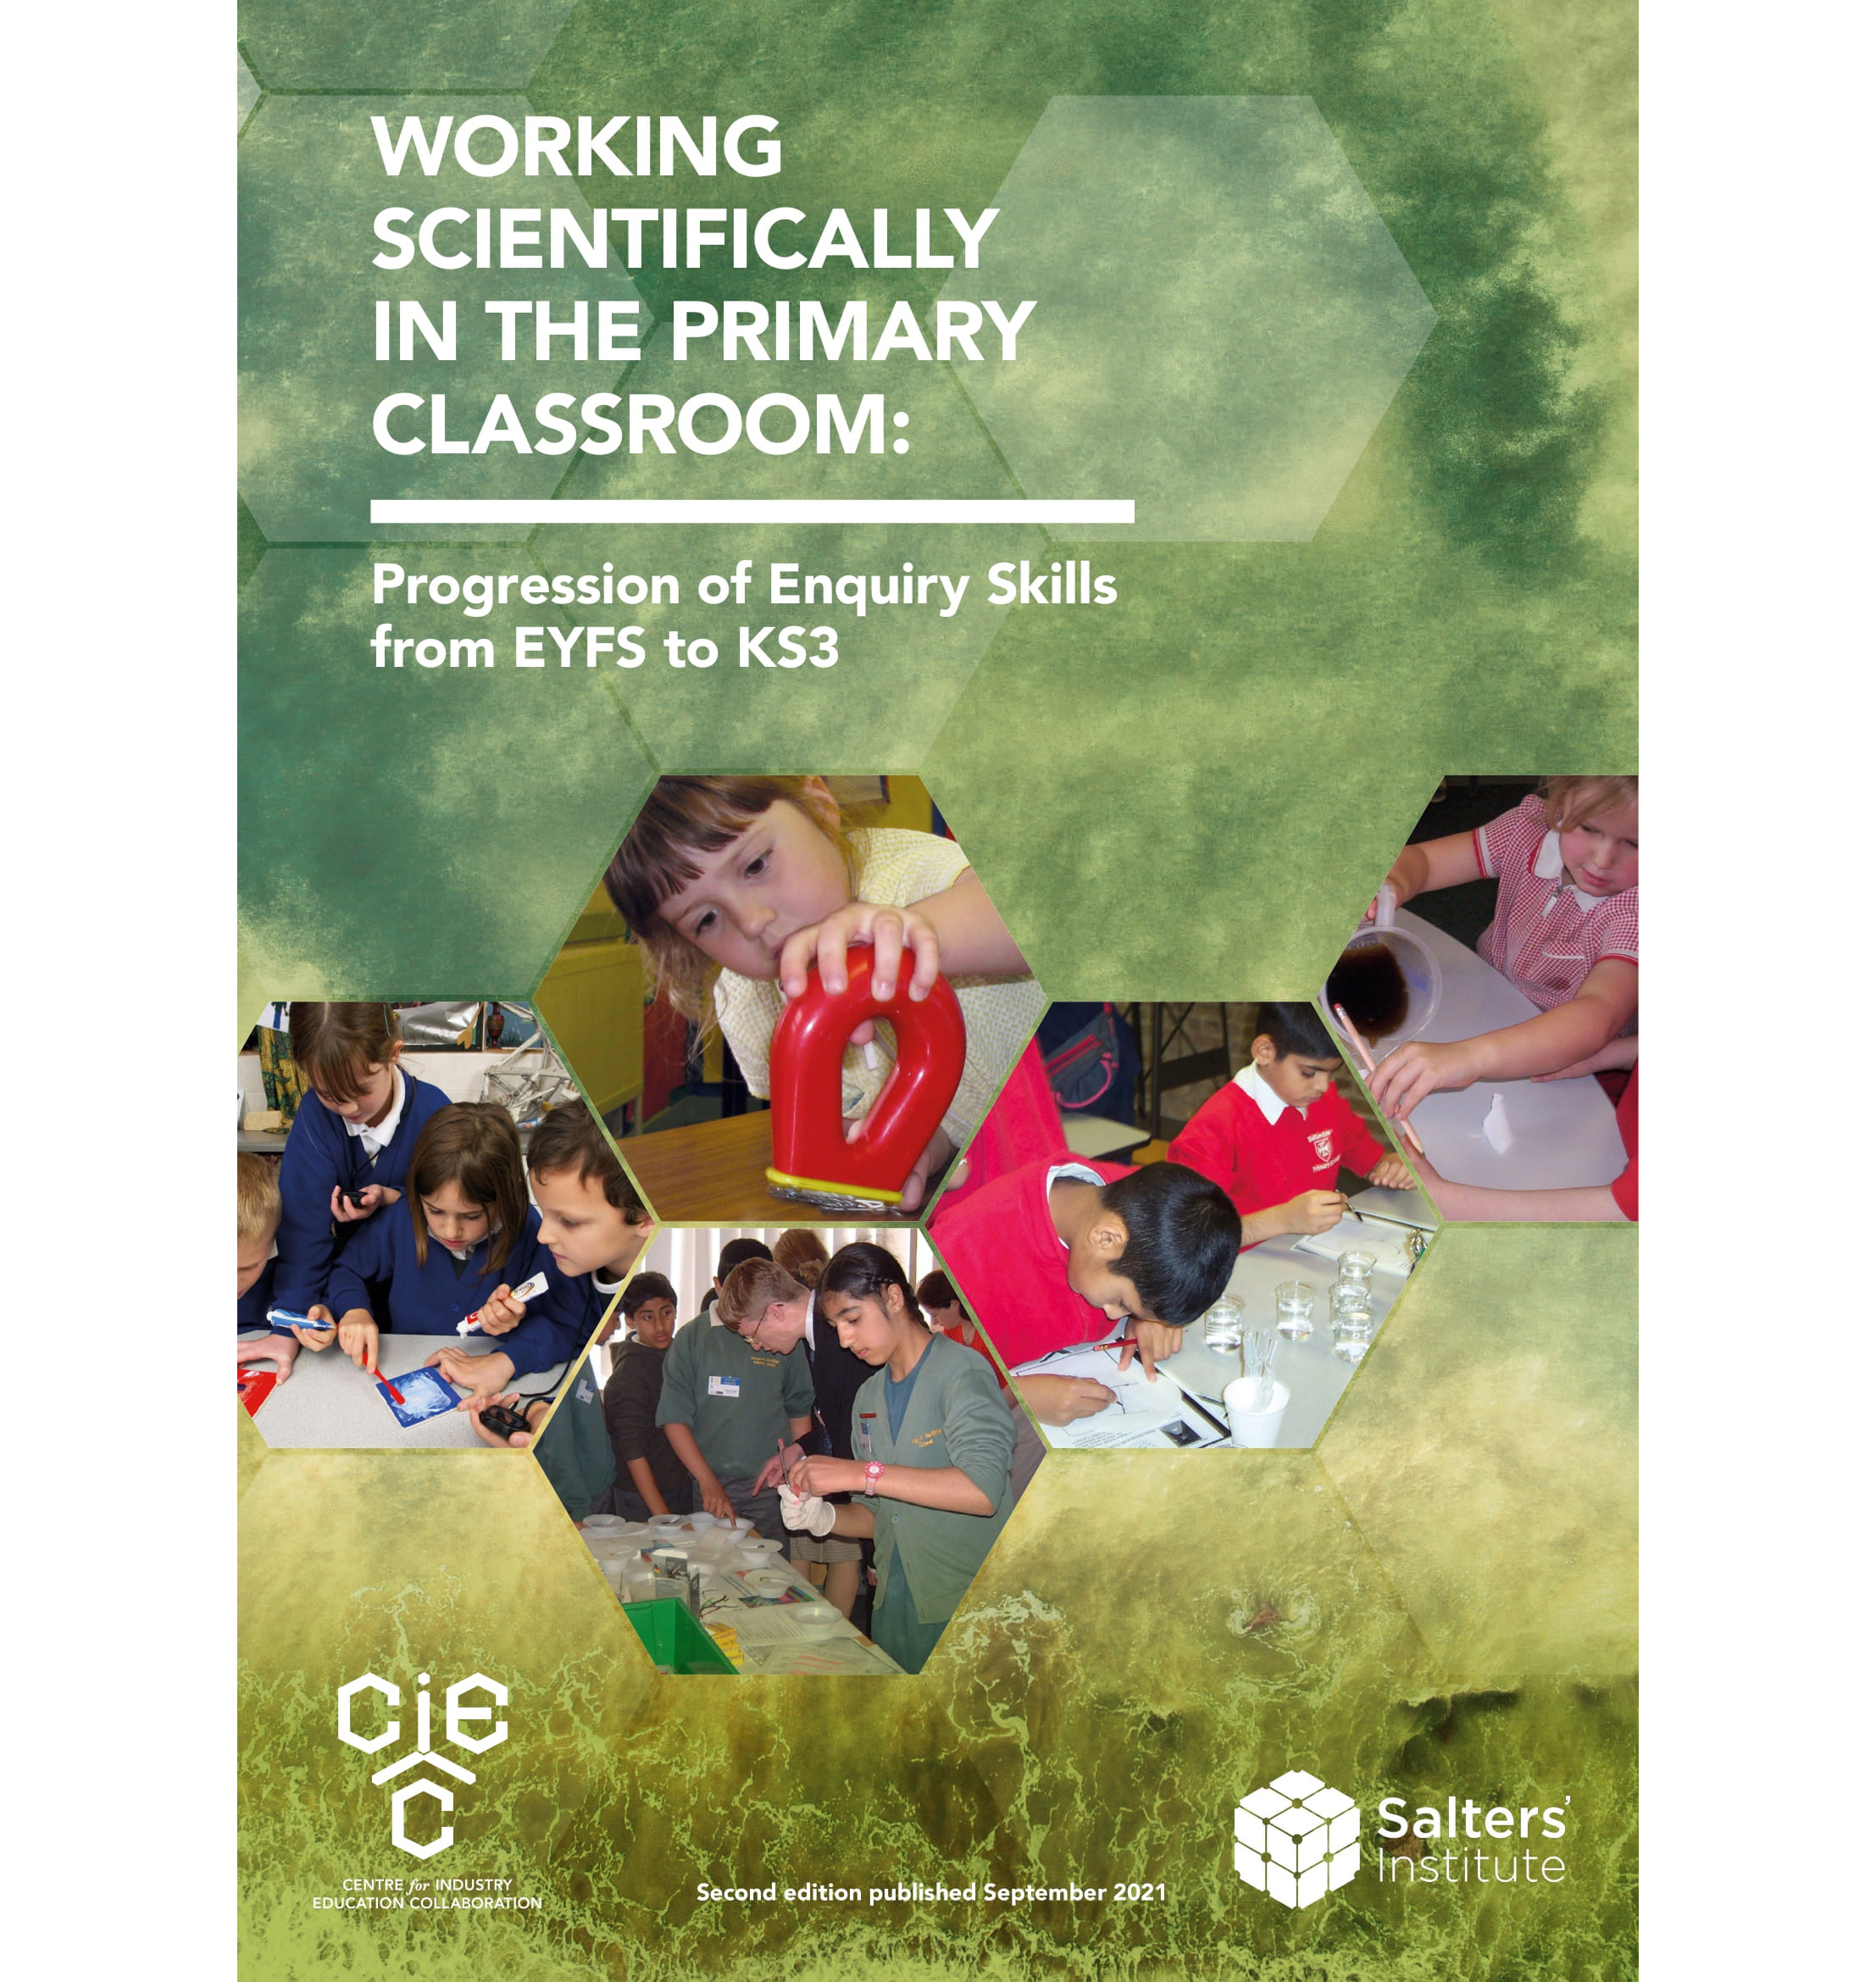 Working Scientifically in the Primary Classroom: Progression of Enquiry Skills from EYFS to KS3